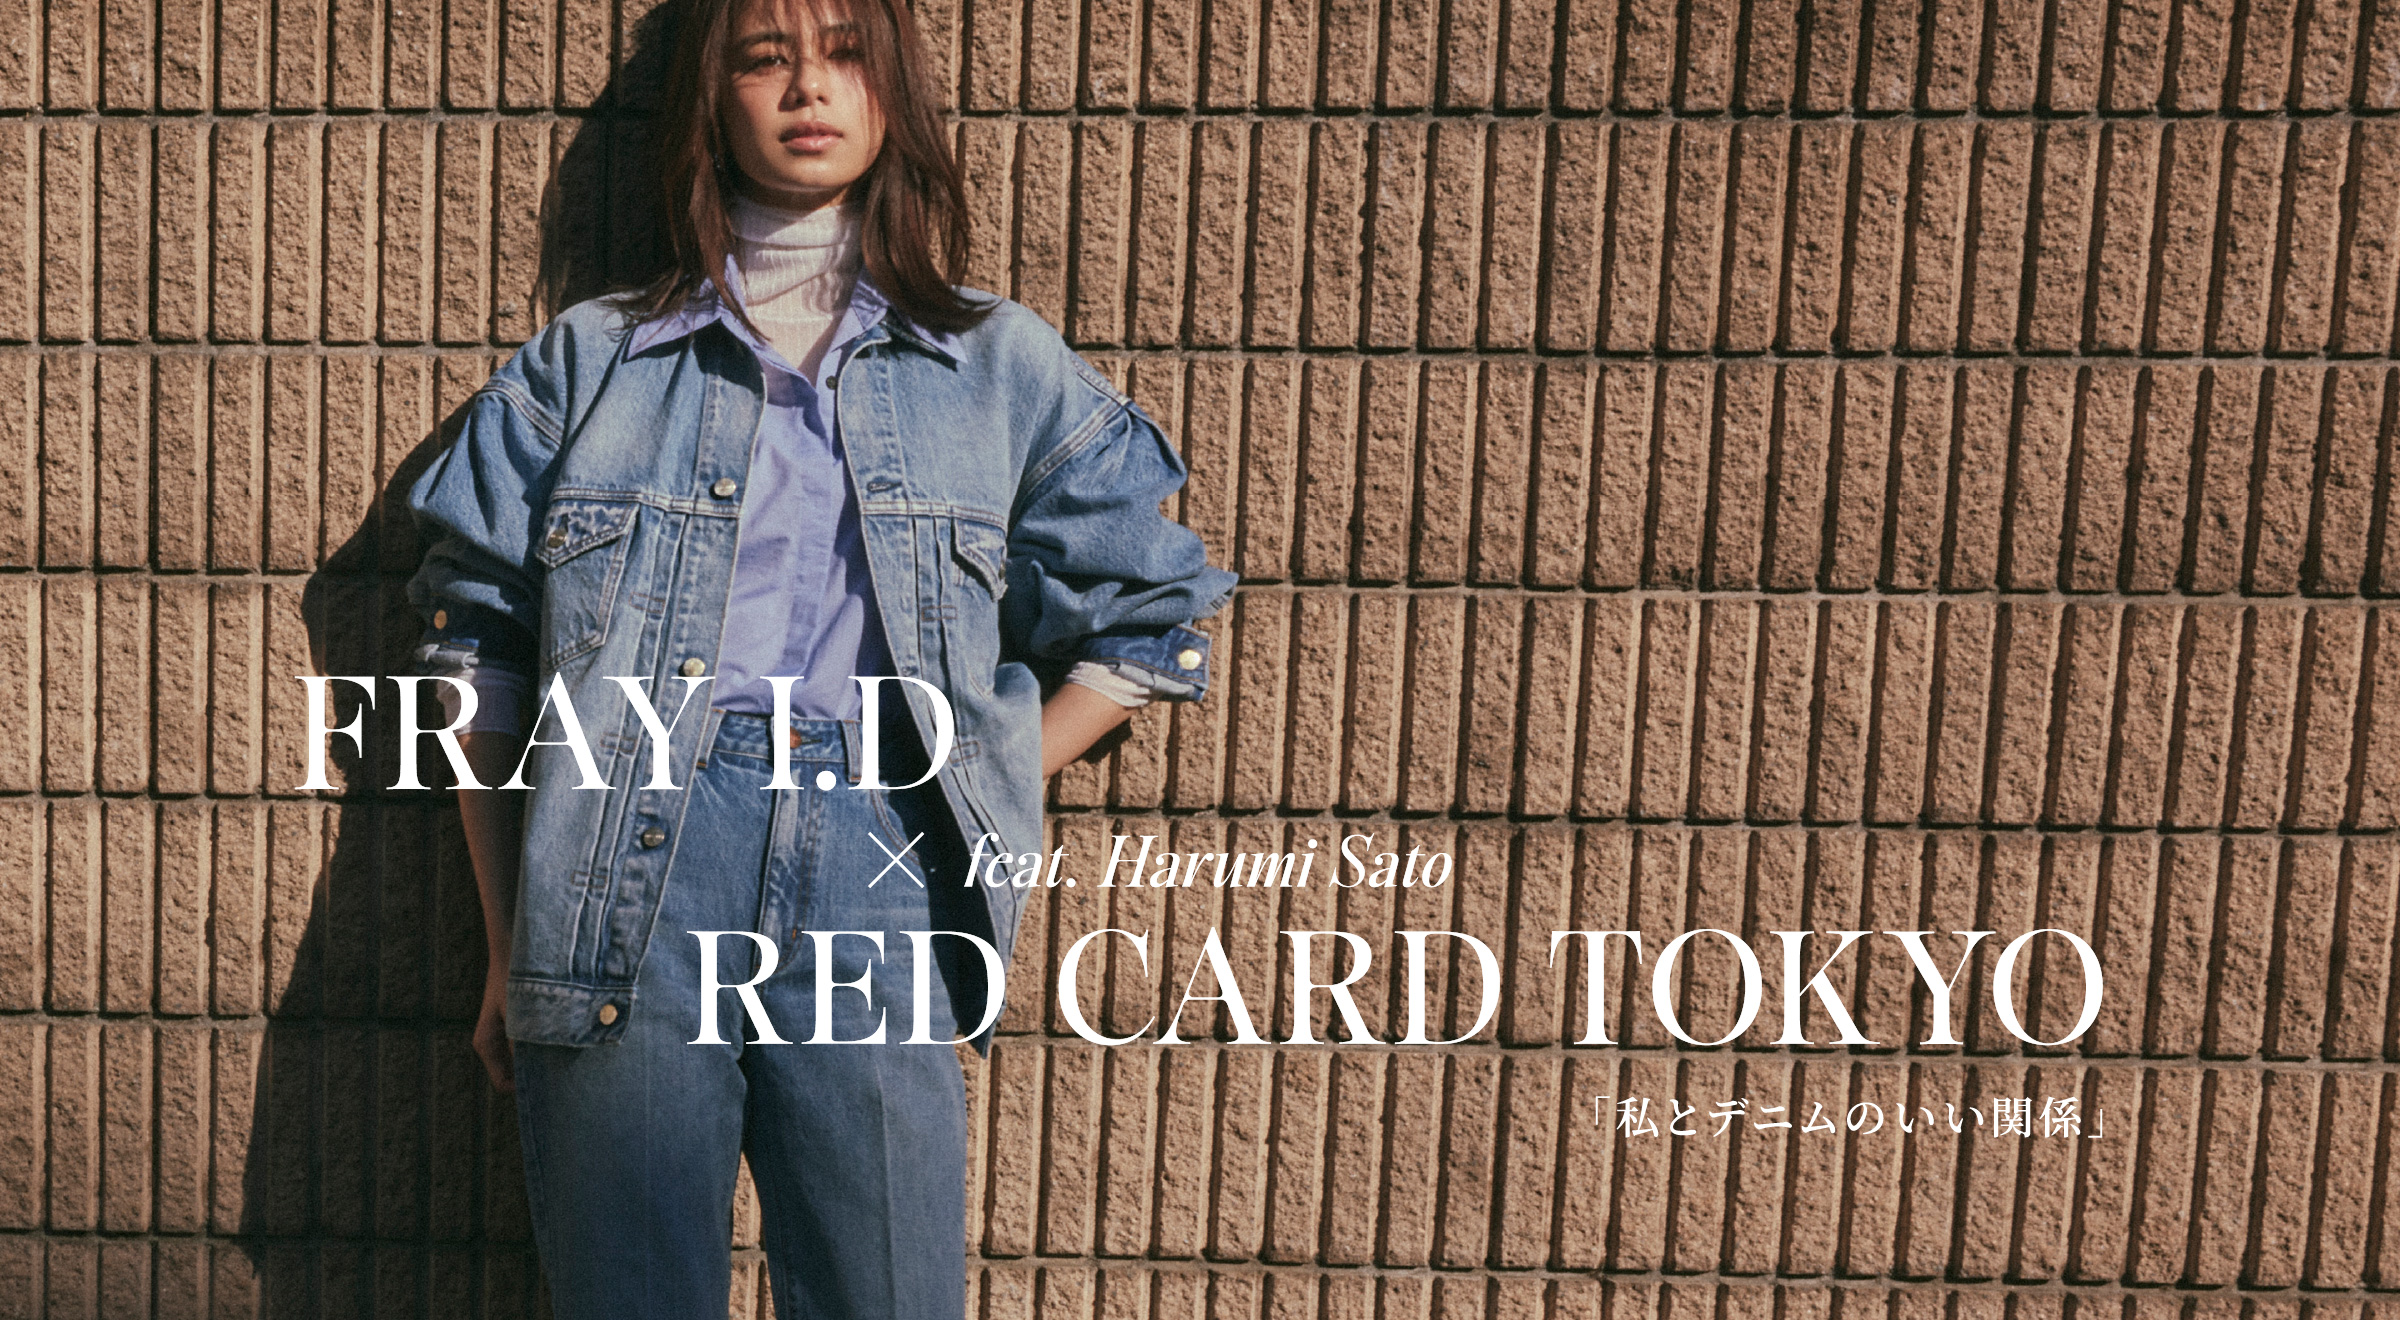 RED CARD TOKYO × FRAY I.D feat.Harumi Sato